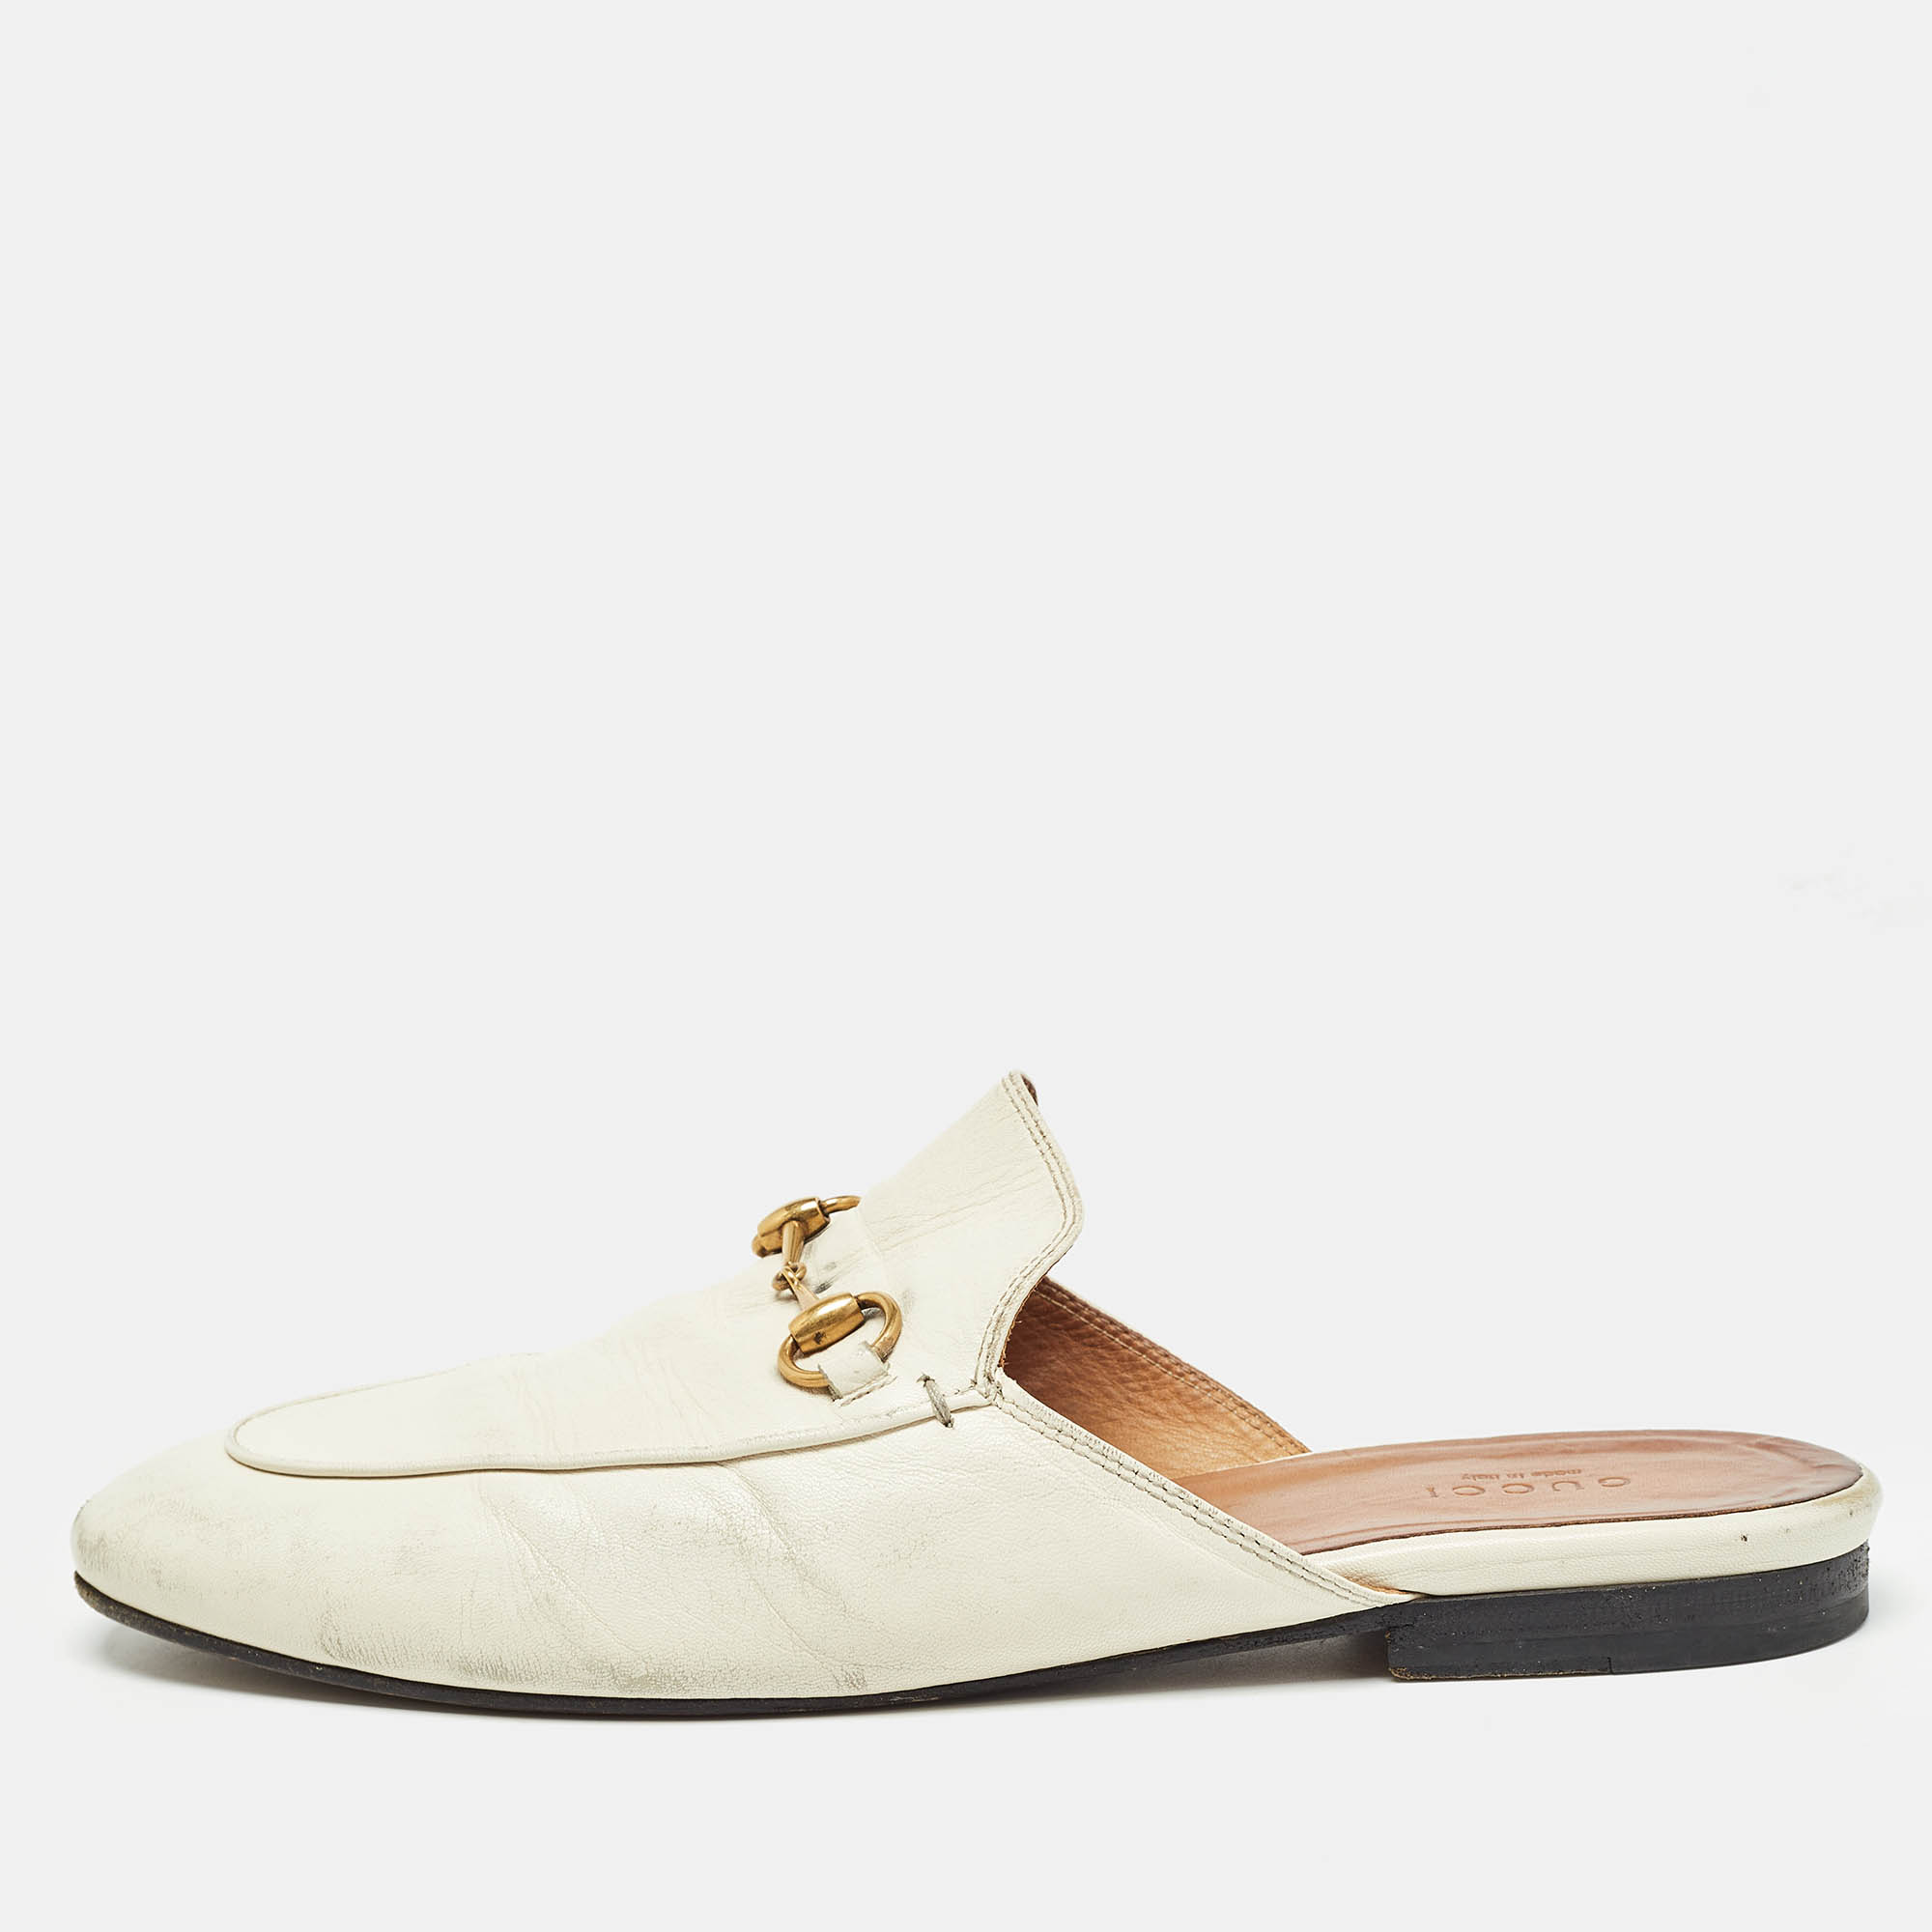 Gucci cream leather princetown mules size 40